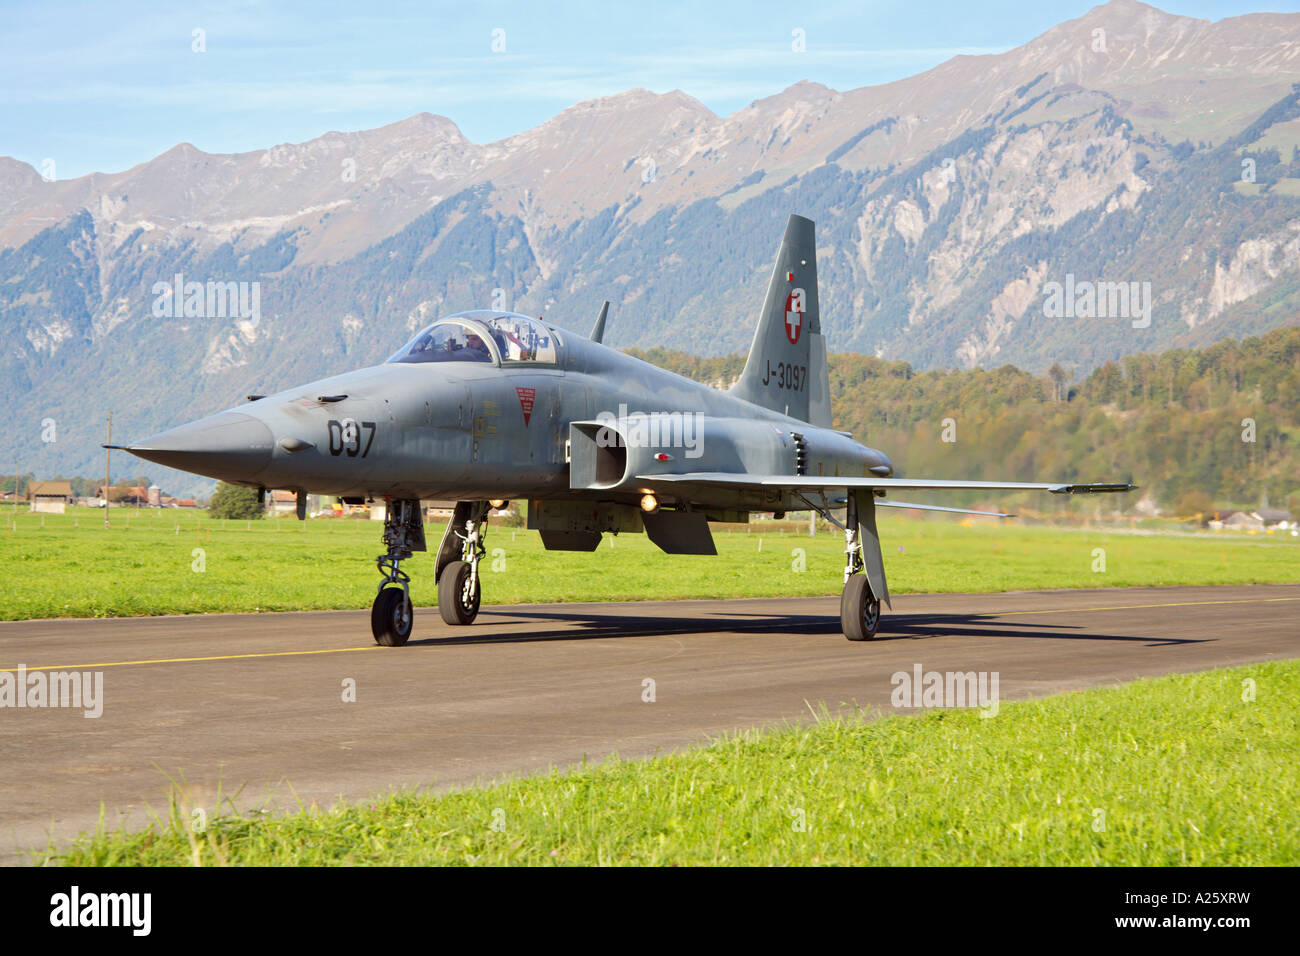 A Swiss Air Force F 5 Tiger II Fighter jet at Meiringen air base Stock Photo